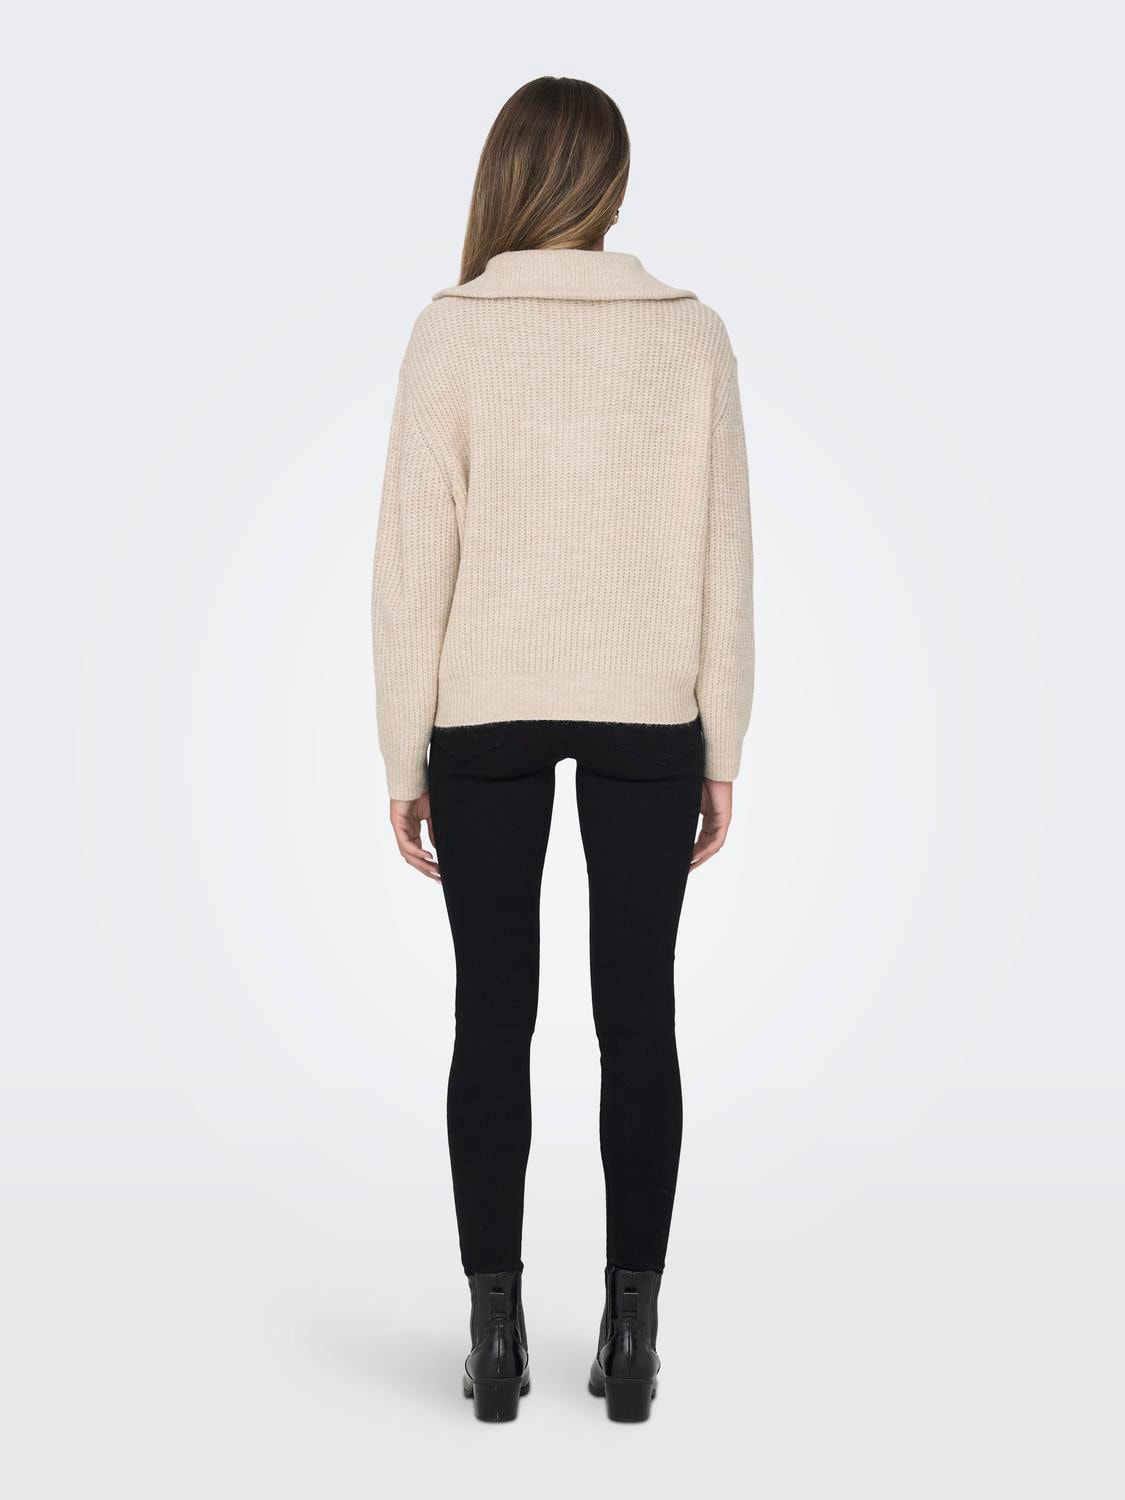 ONLY Knitted pullover with zip -Cloud Dancer - 15247008